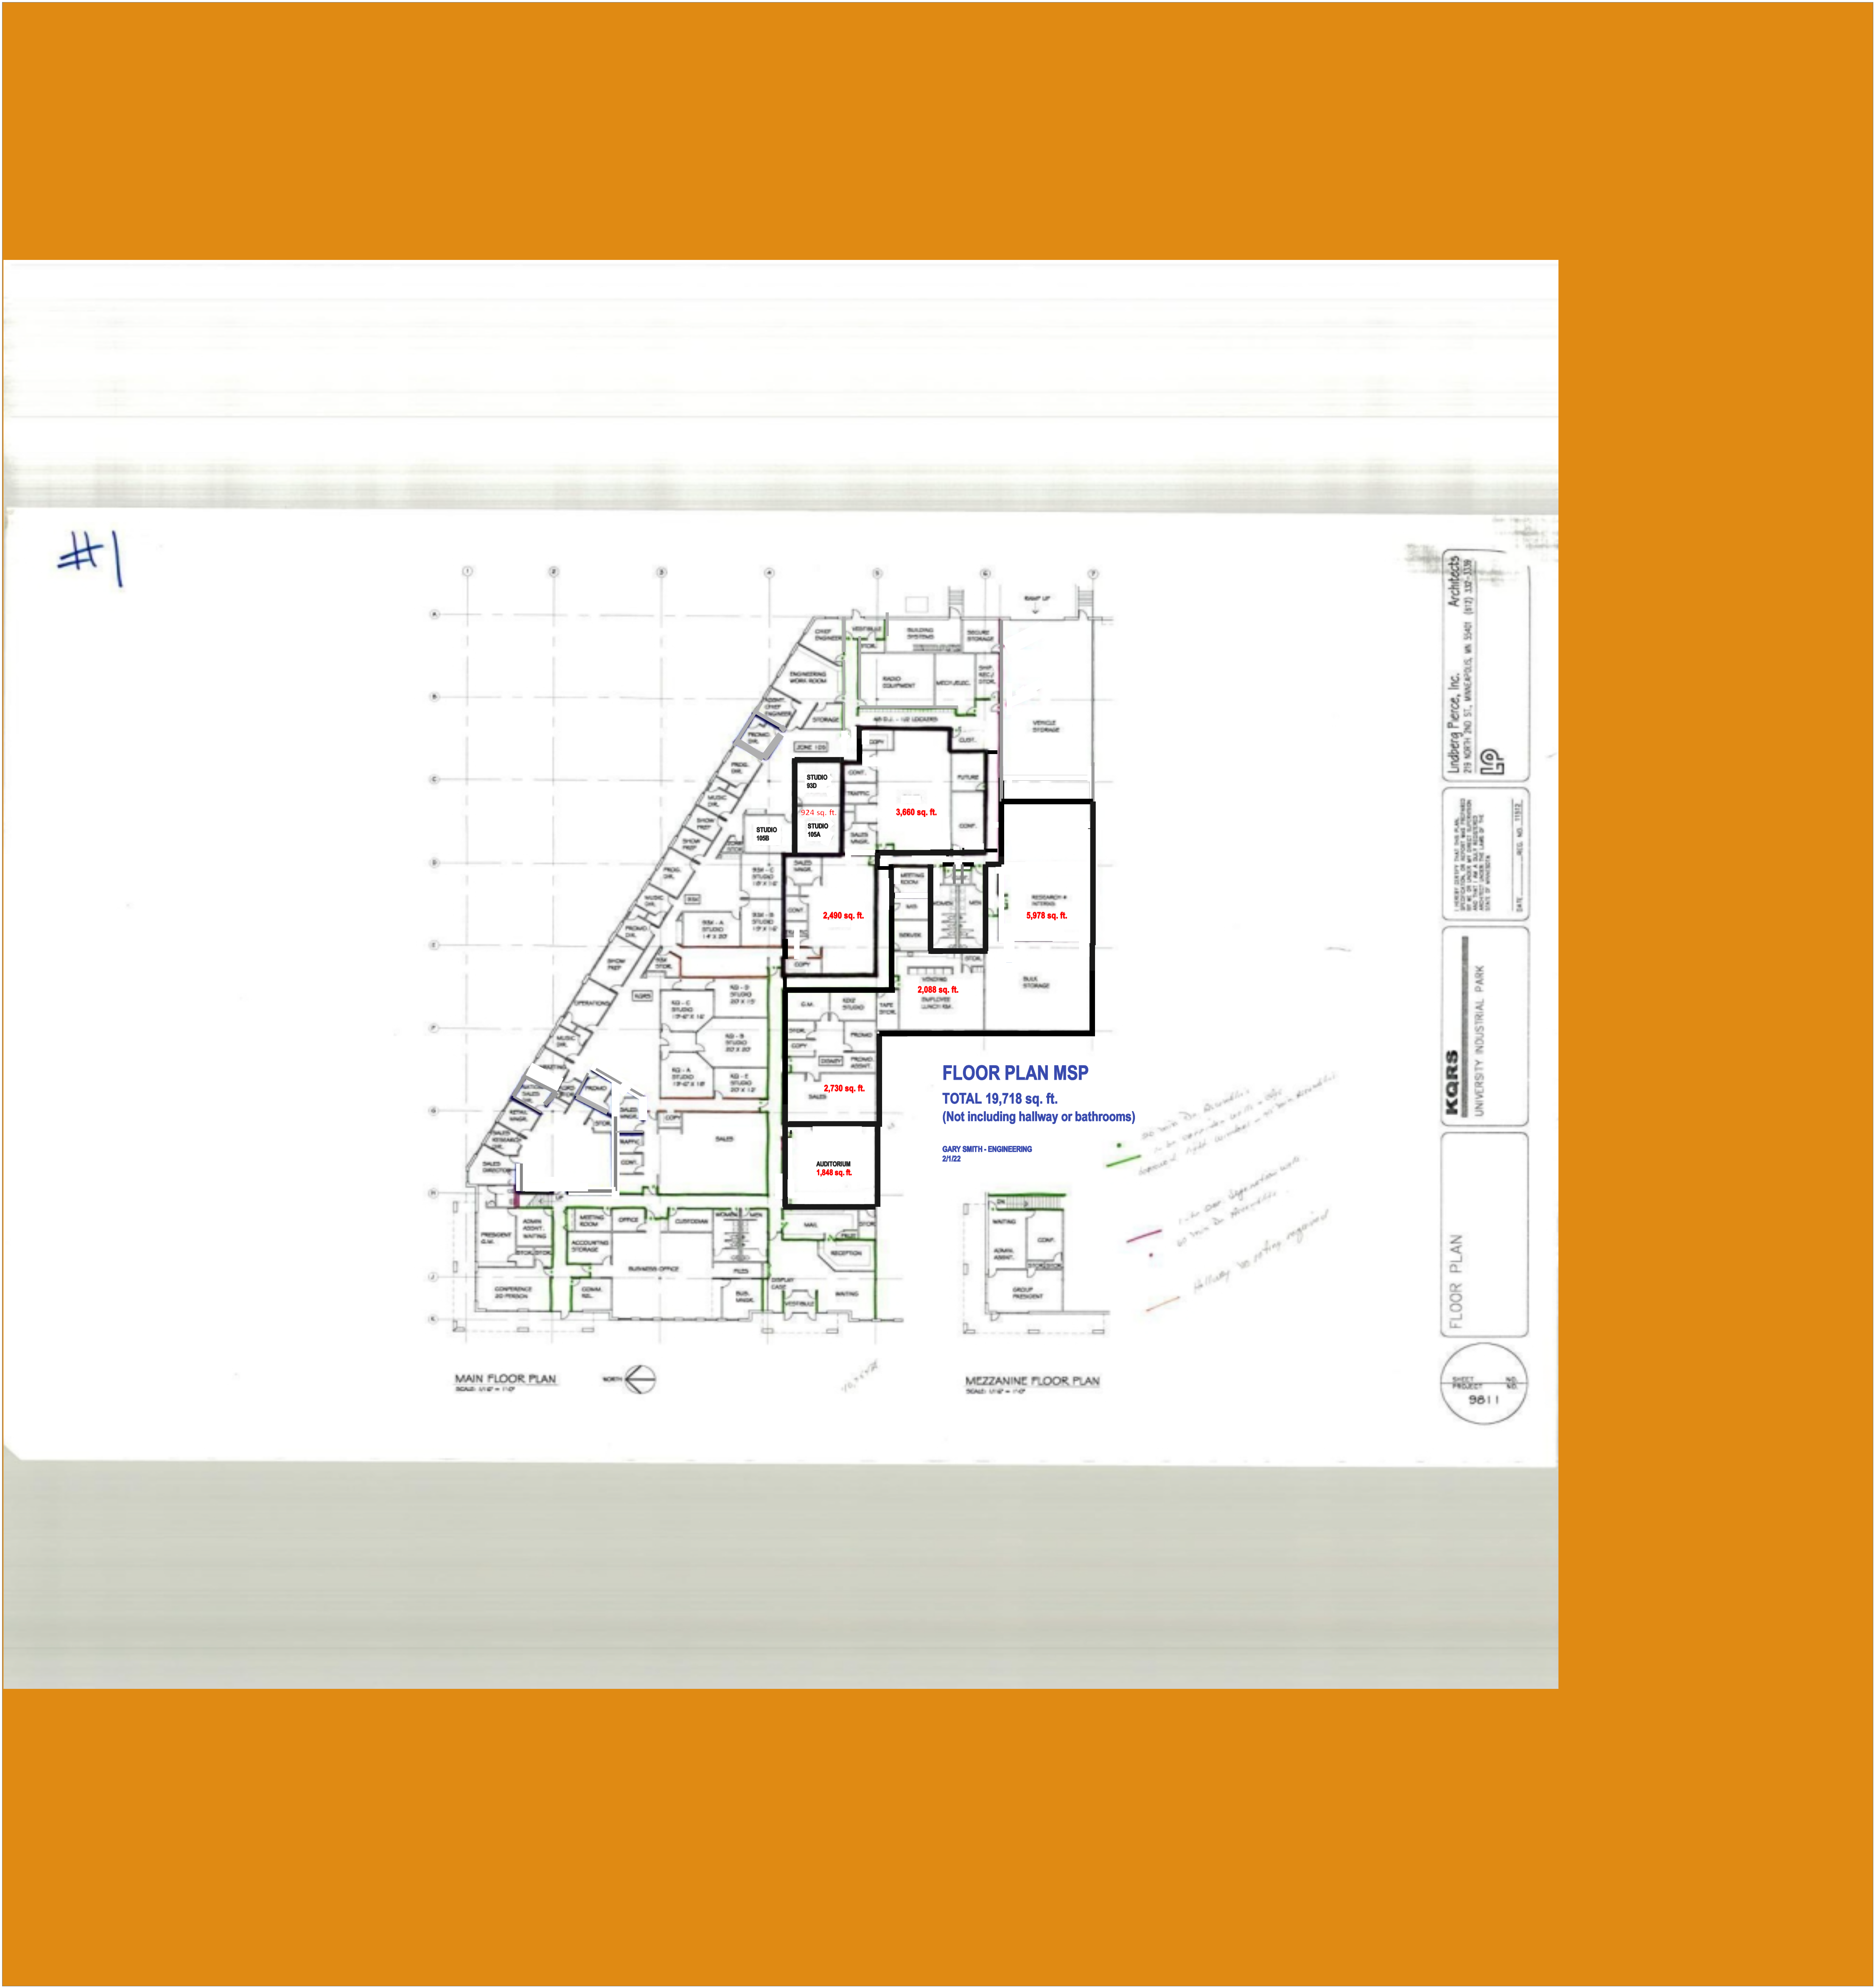 A floor plan is a diagram that shows how a house or property is laid out from the top down. Floor plans frequently feature fixed installations such as bathroom fixtures, kitchen cabinets, and appliances, as well as walls, windows, doors, and stairs. Floor